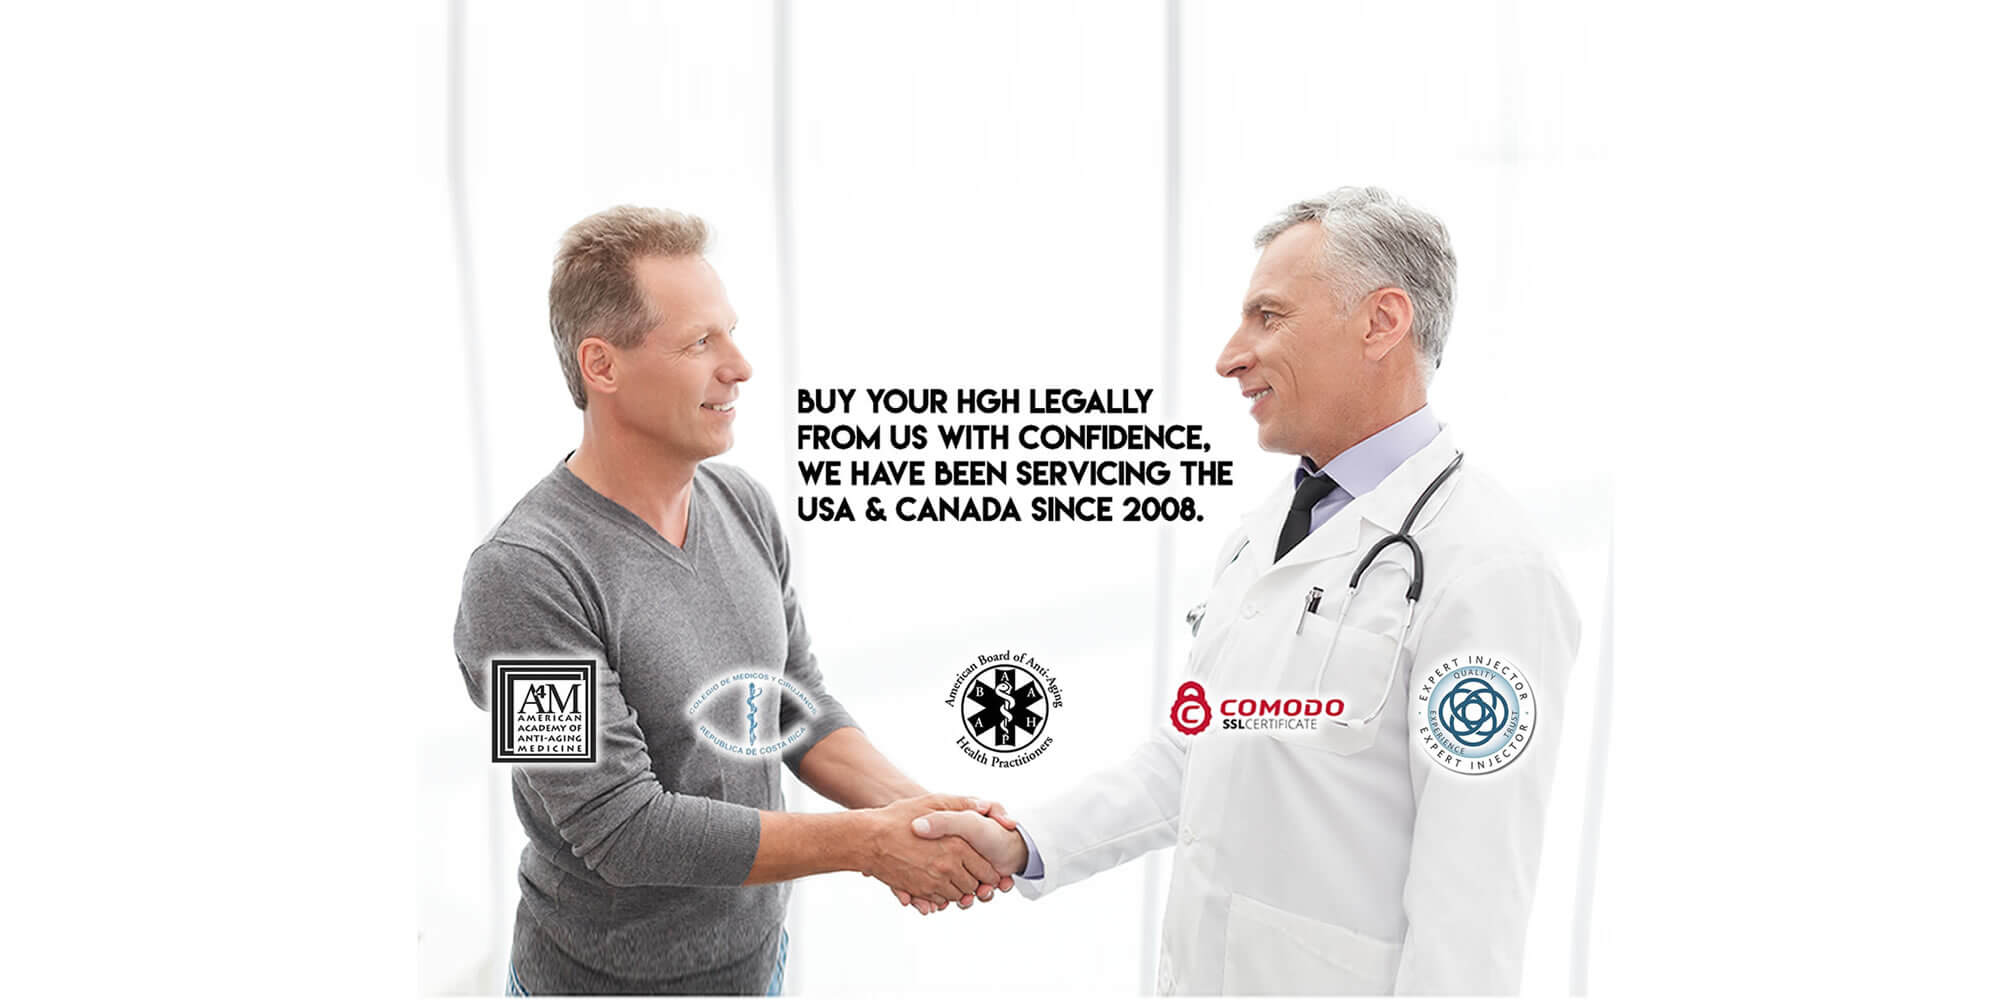 Buy your HGH legally - Buy HGH - Certified Doctors